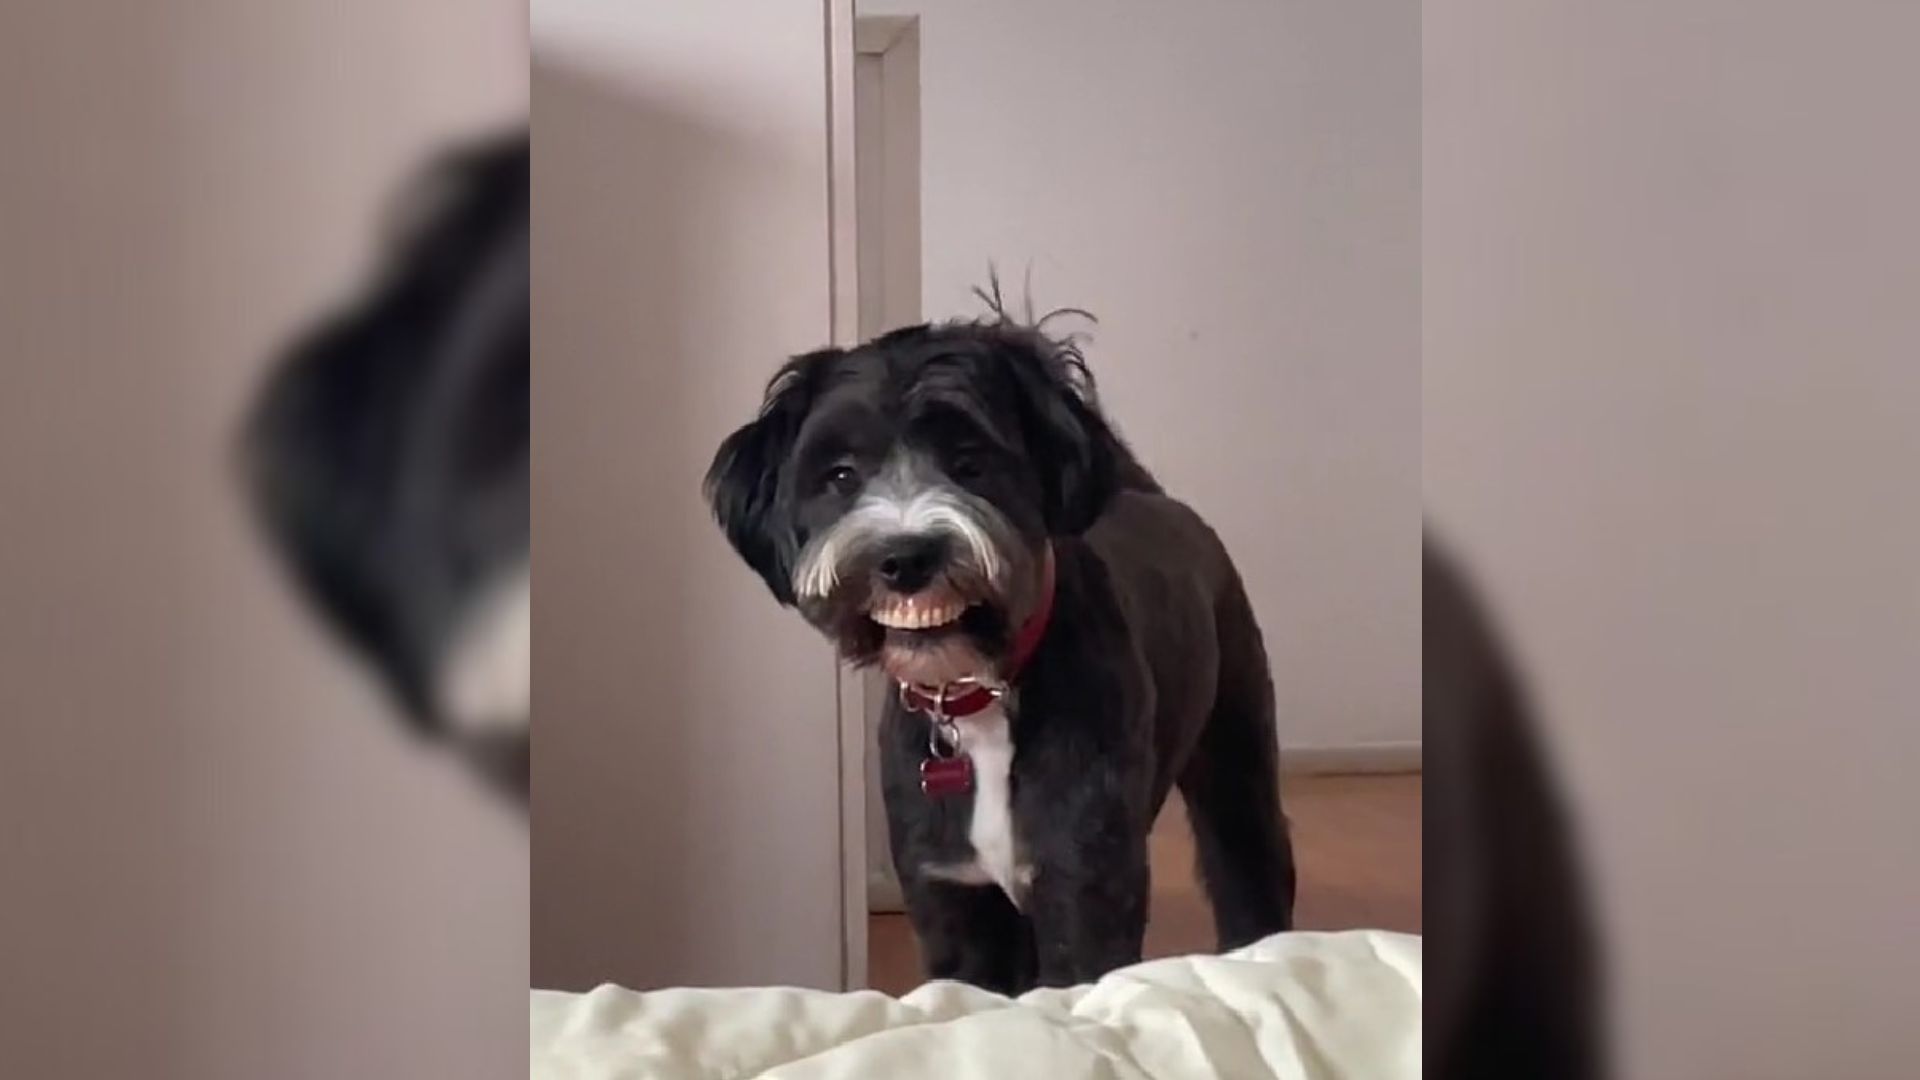 Mom Saw Her Pup’s “Weird New Smile” And Couldn’t Hold In Her Laughter